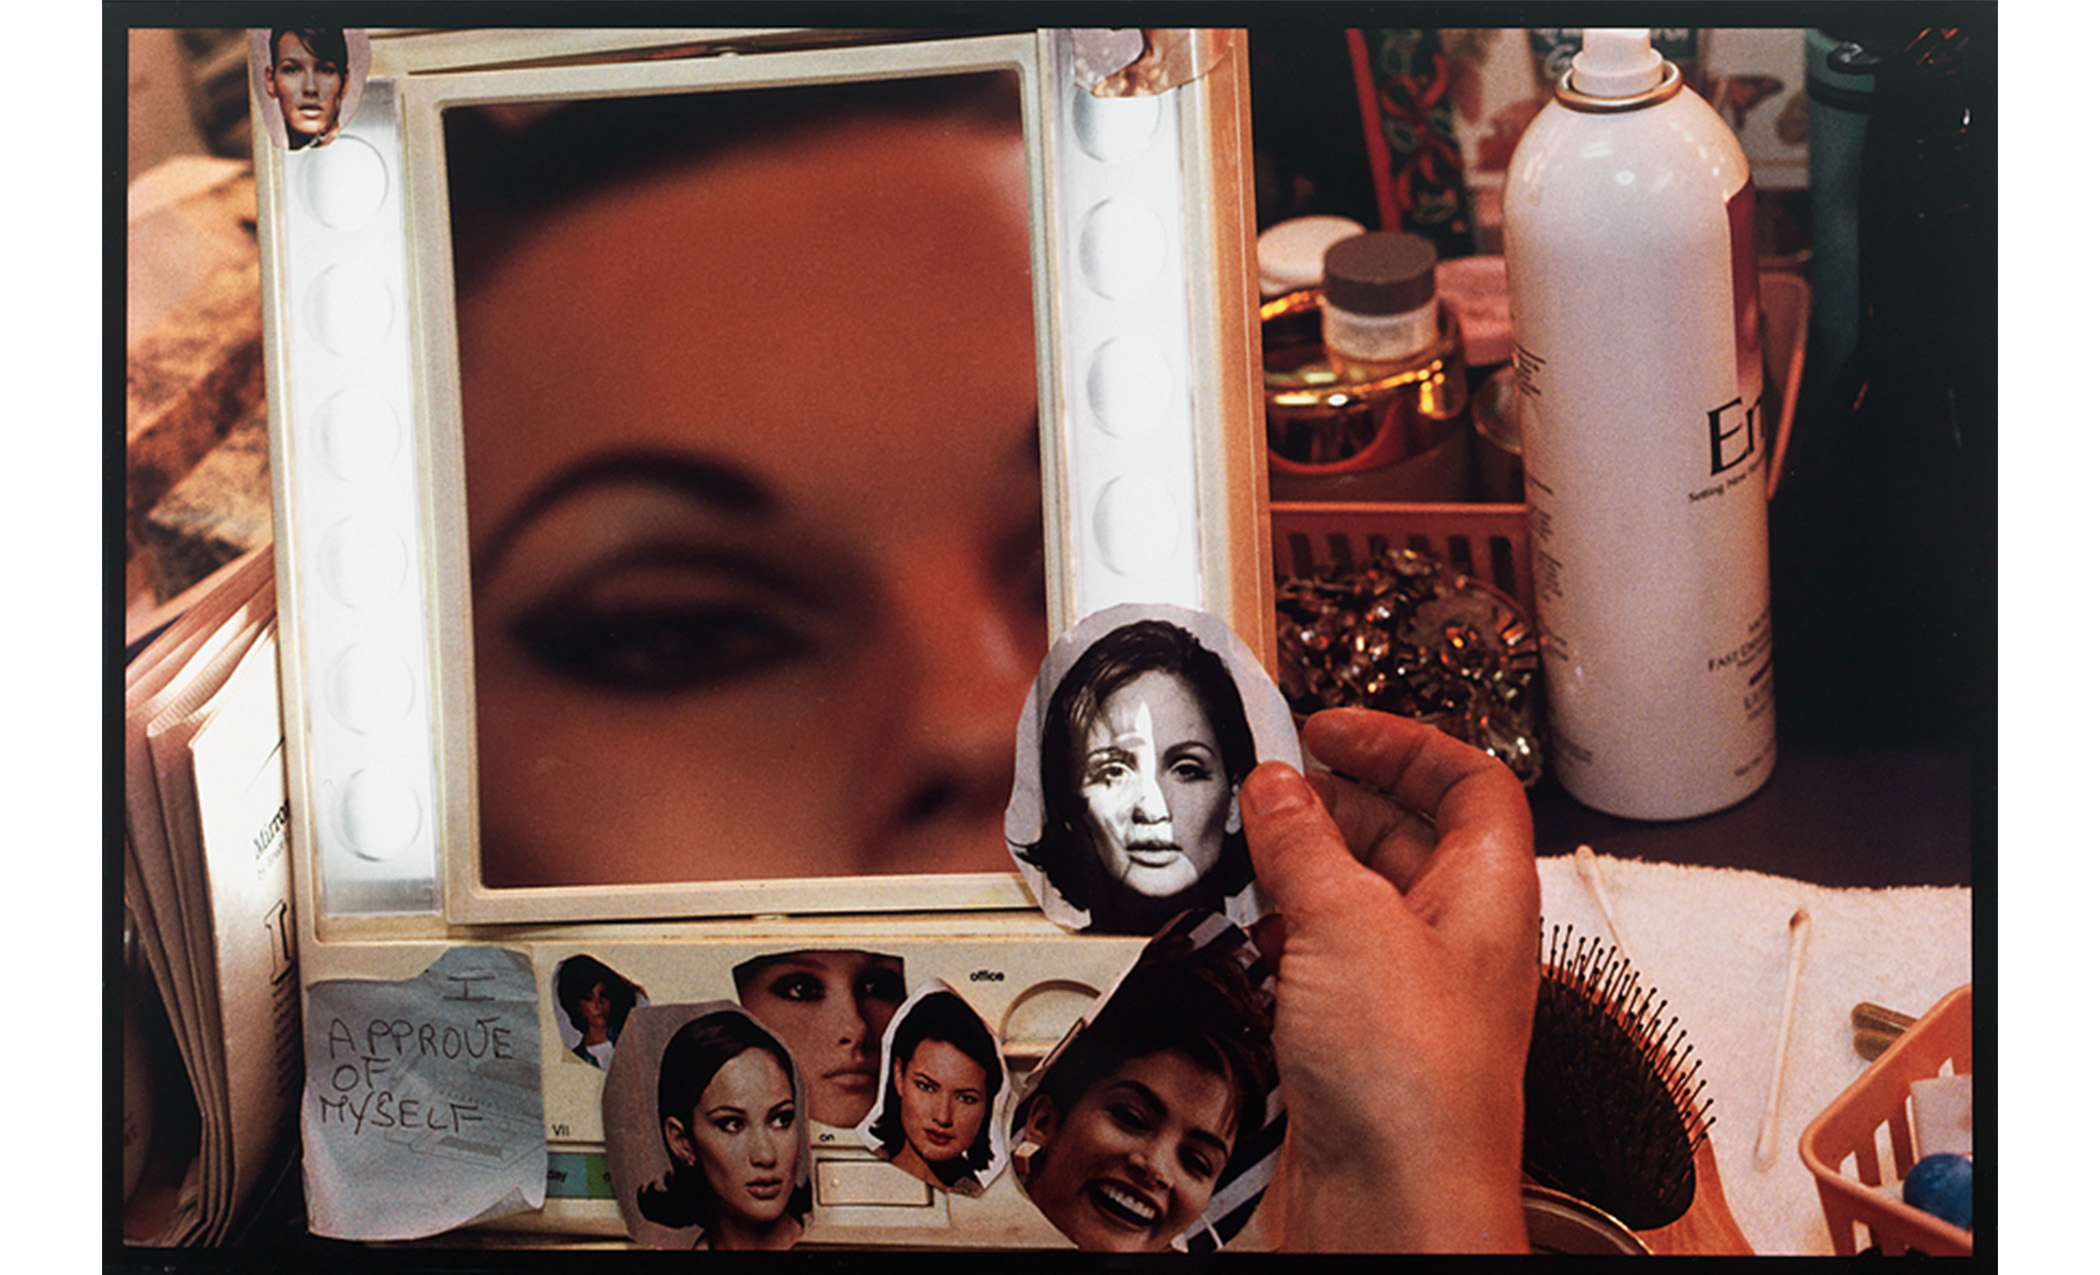 interior, close-up of a crowded dressing table with lighted mirror showing part of a woman's face as her hand holds the cut-out image of a model's head, other heads are attached to the mirror with a note saying "I / APPROVE / OF / MYSELF"